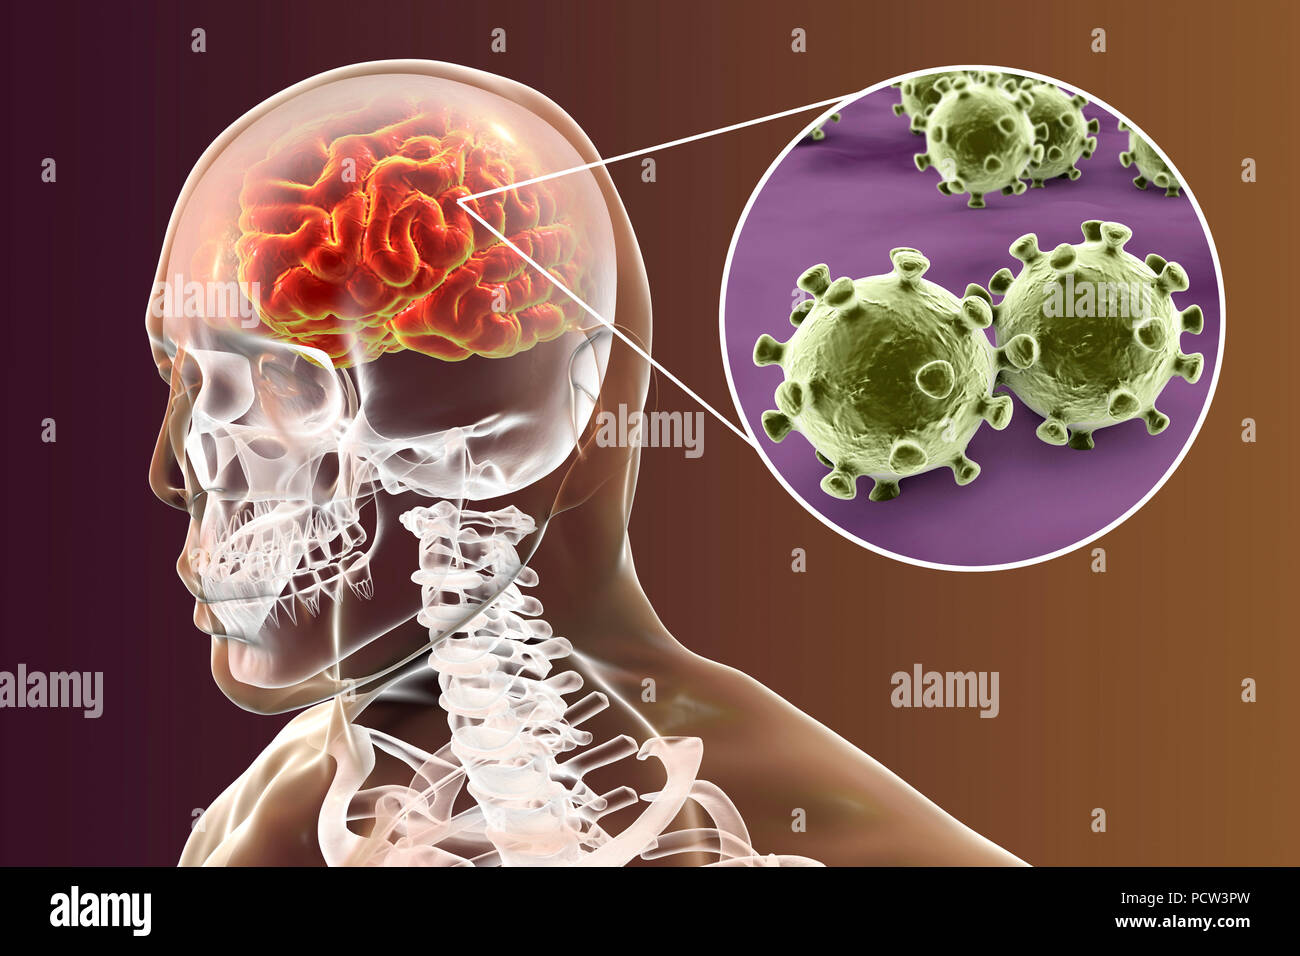 Viral encephalitis. Conceptual illustration showing brain with signs of encephalitis inside human body and close-up view of viruses. Stock Photo